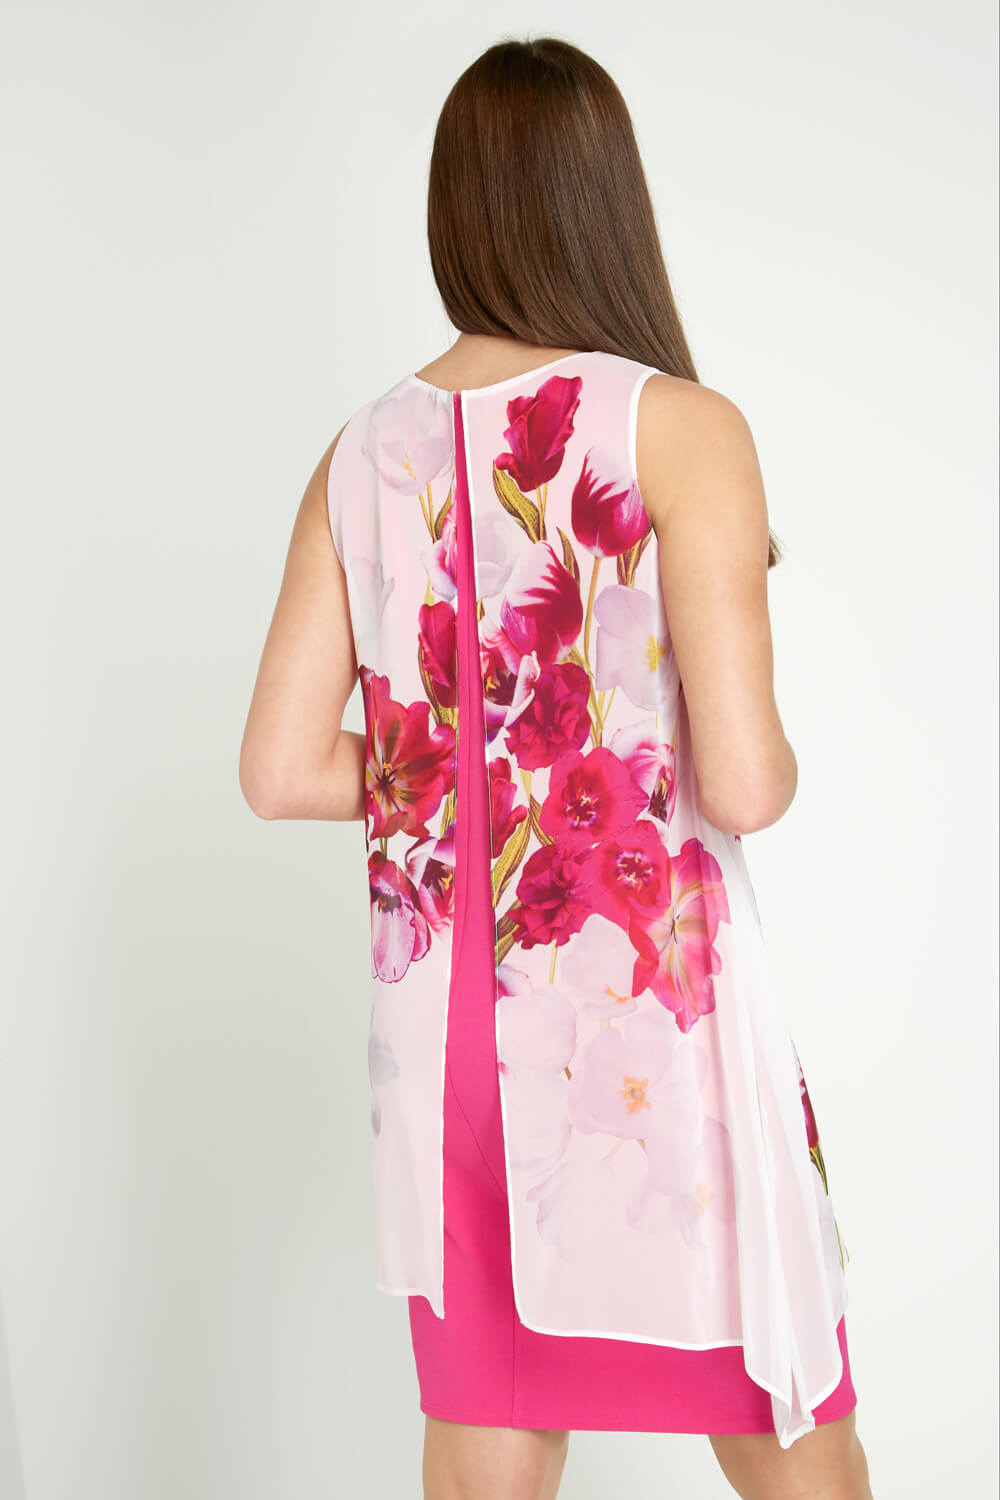 ORCHID Floral Print Chiffon Overlay Dress, Image 2 of 3